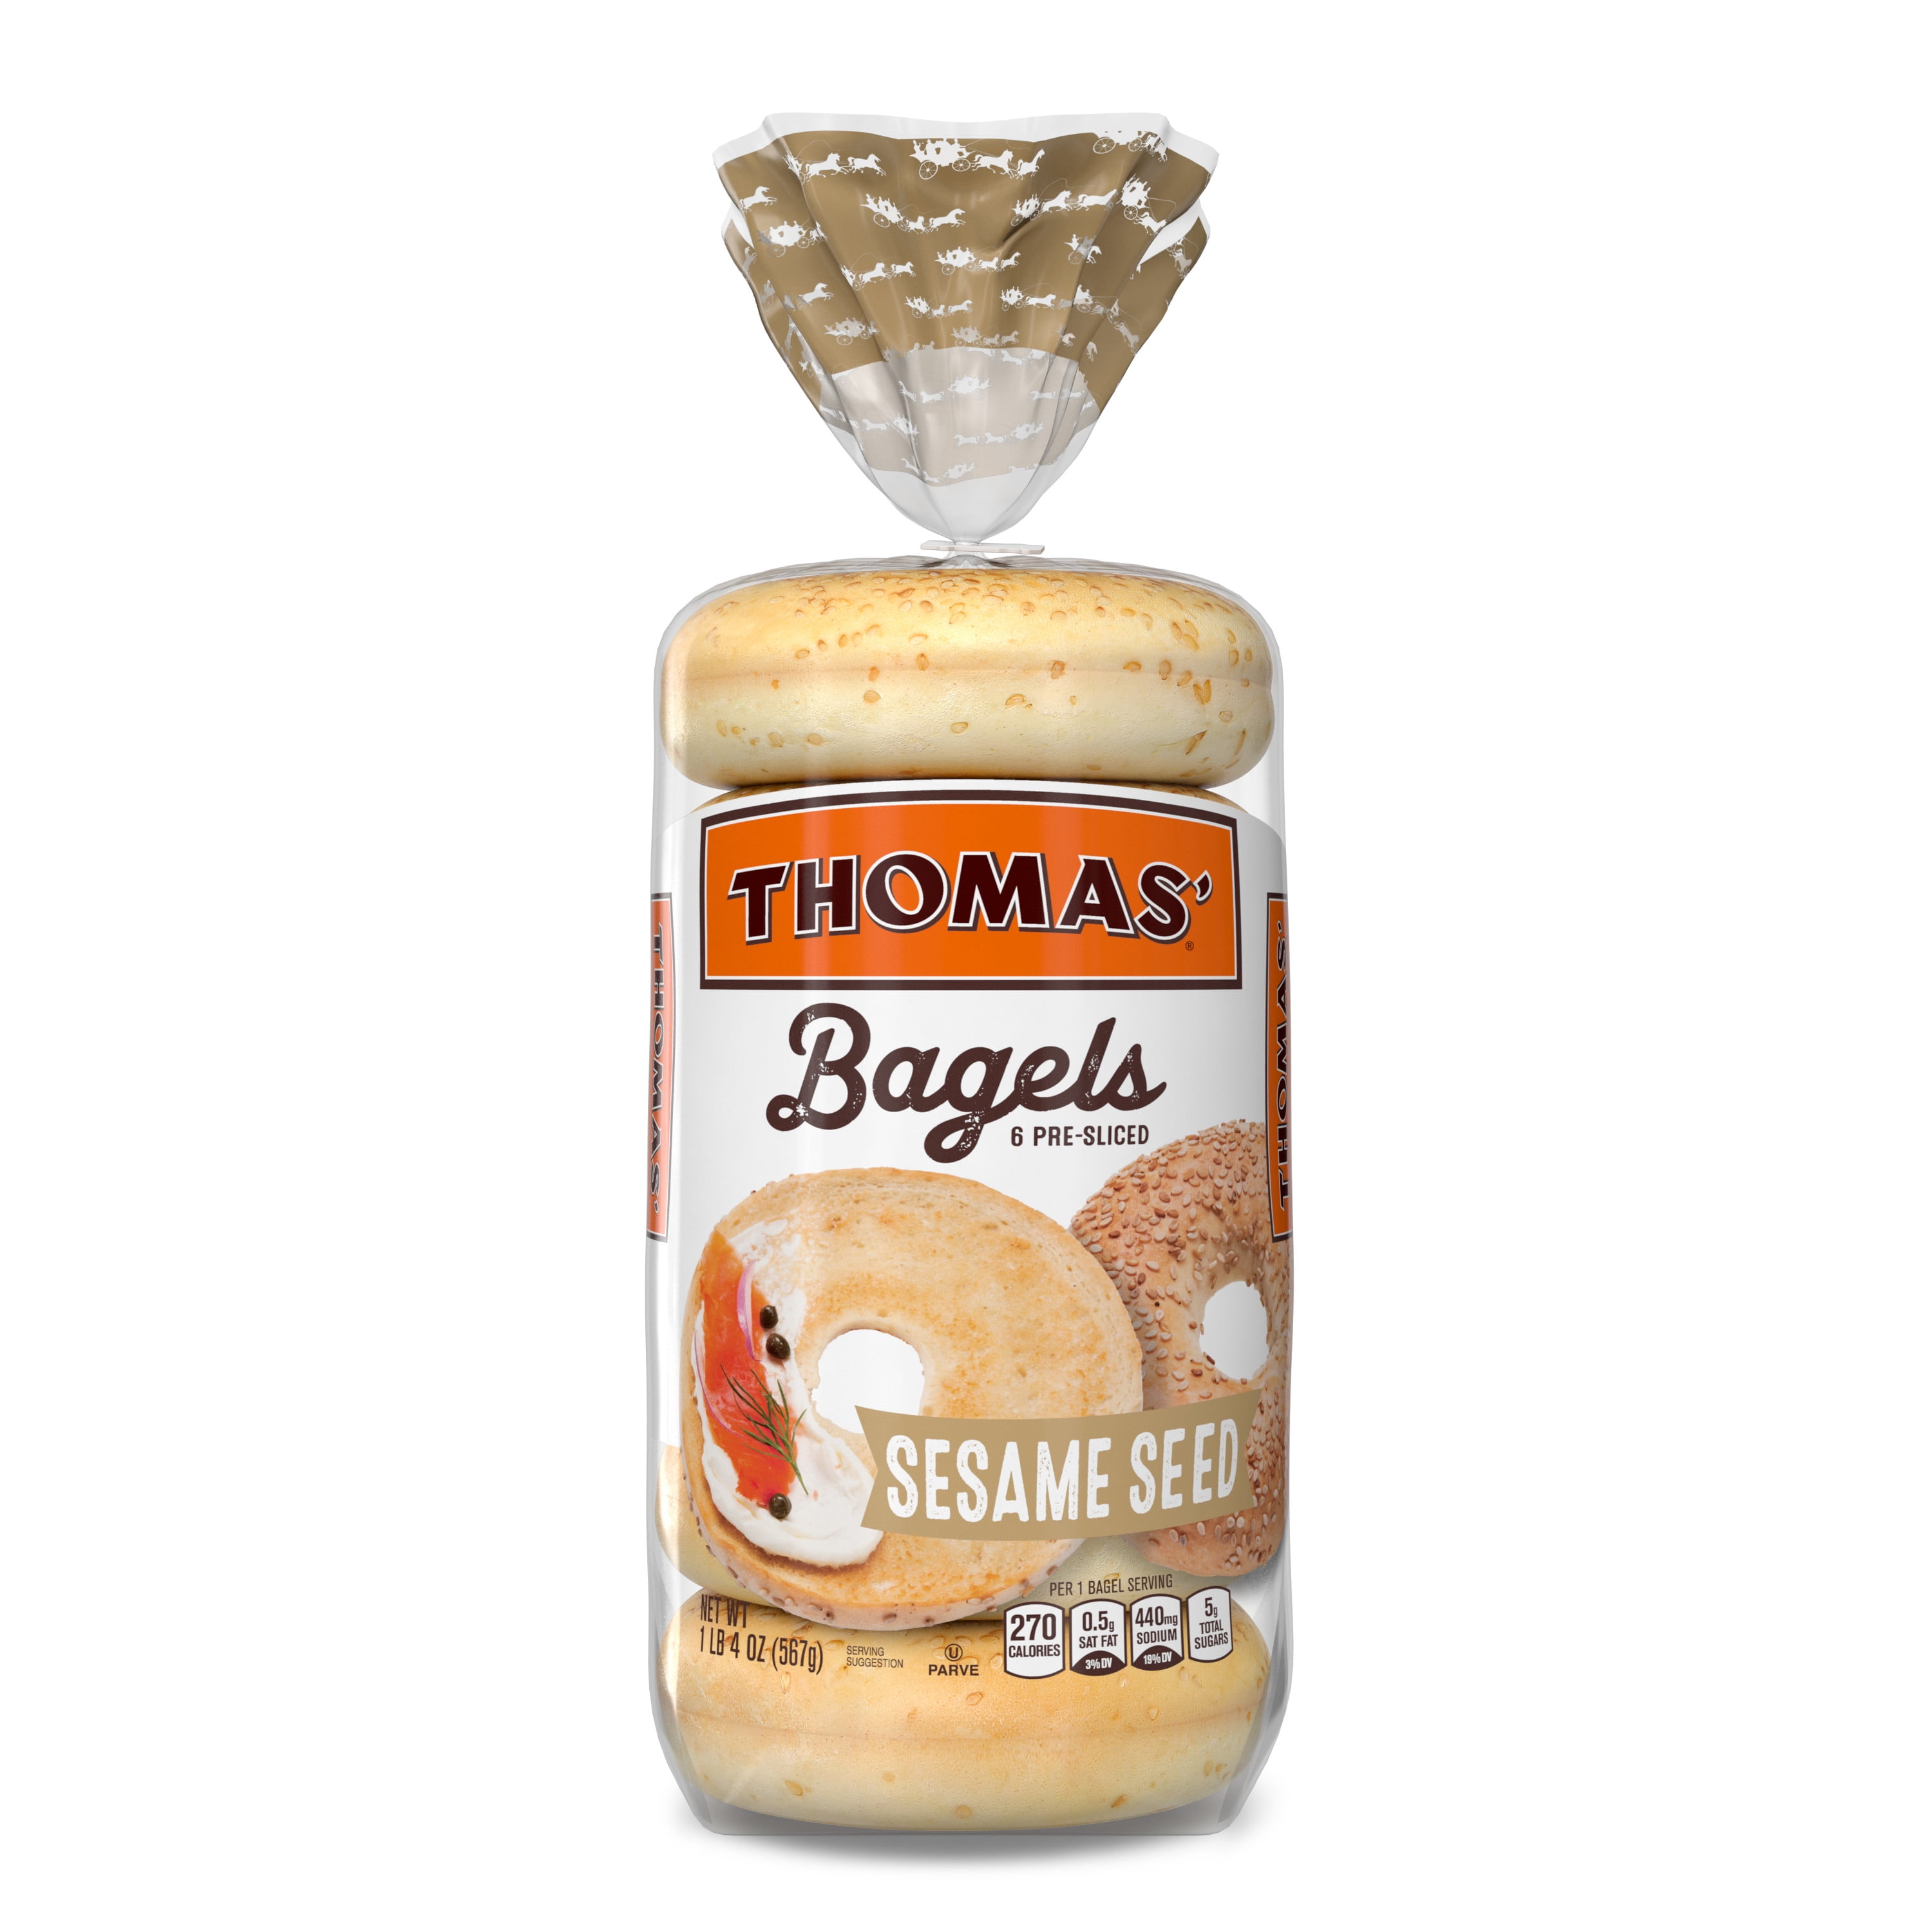 Thomas' Sesame Seed Soft & Chewy Pre-Sliced Bagels, 6 count, 20 oz